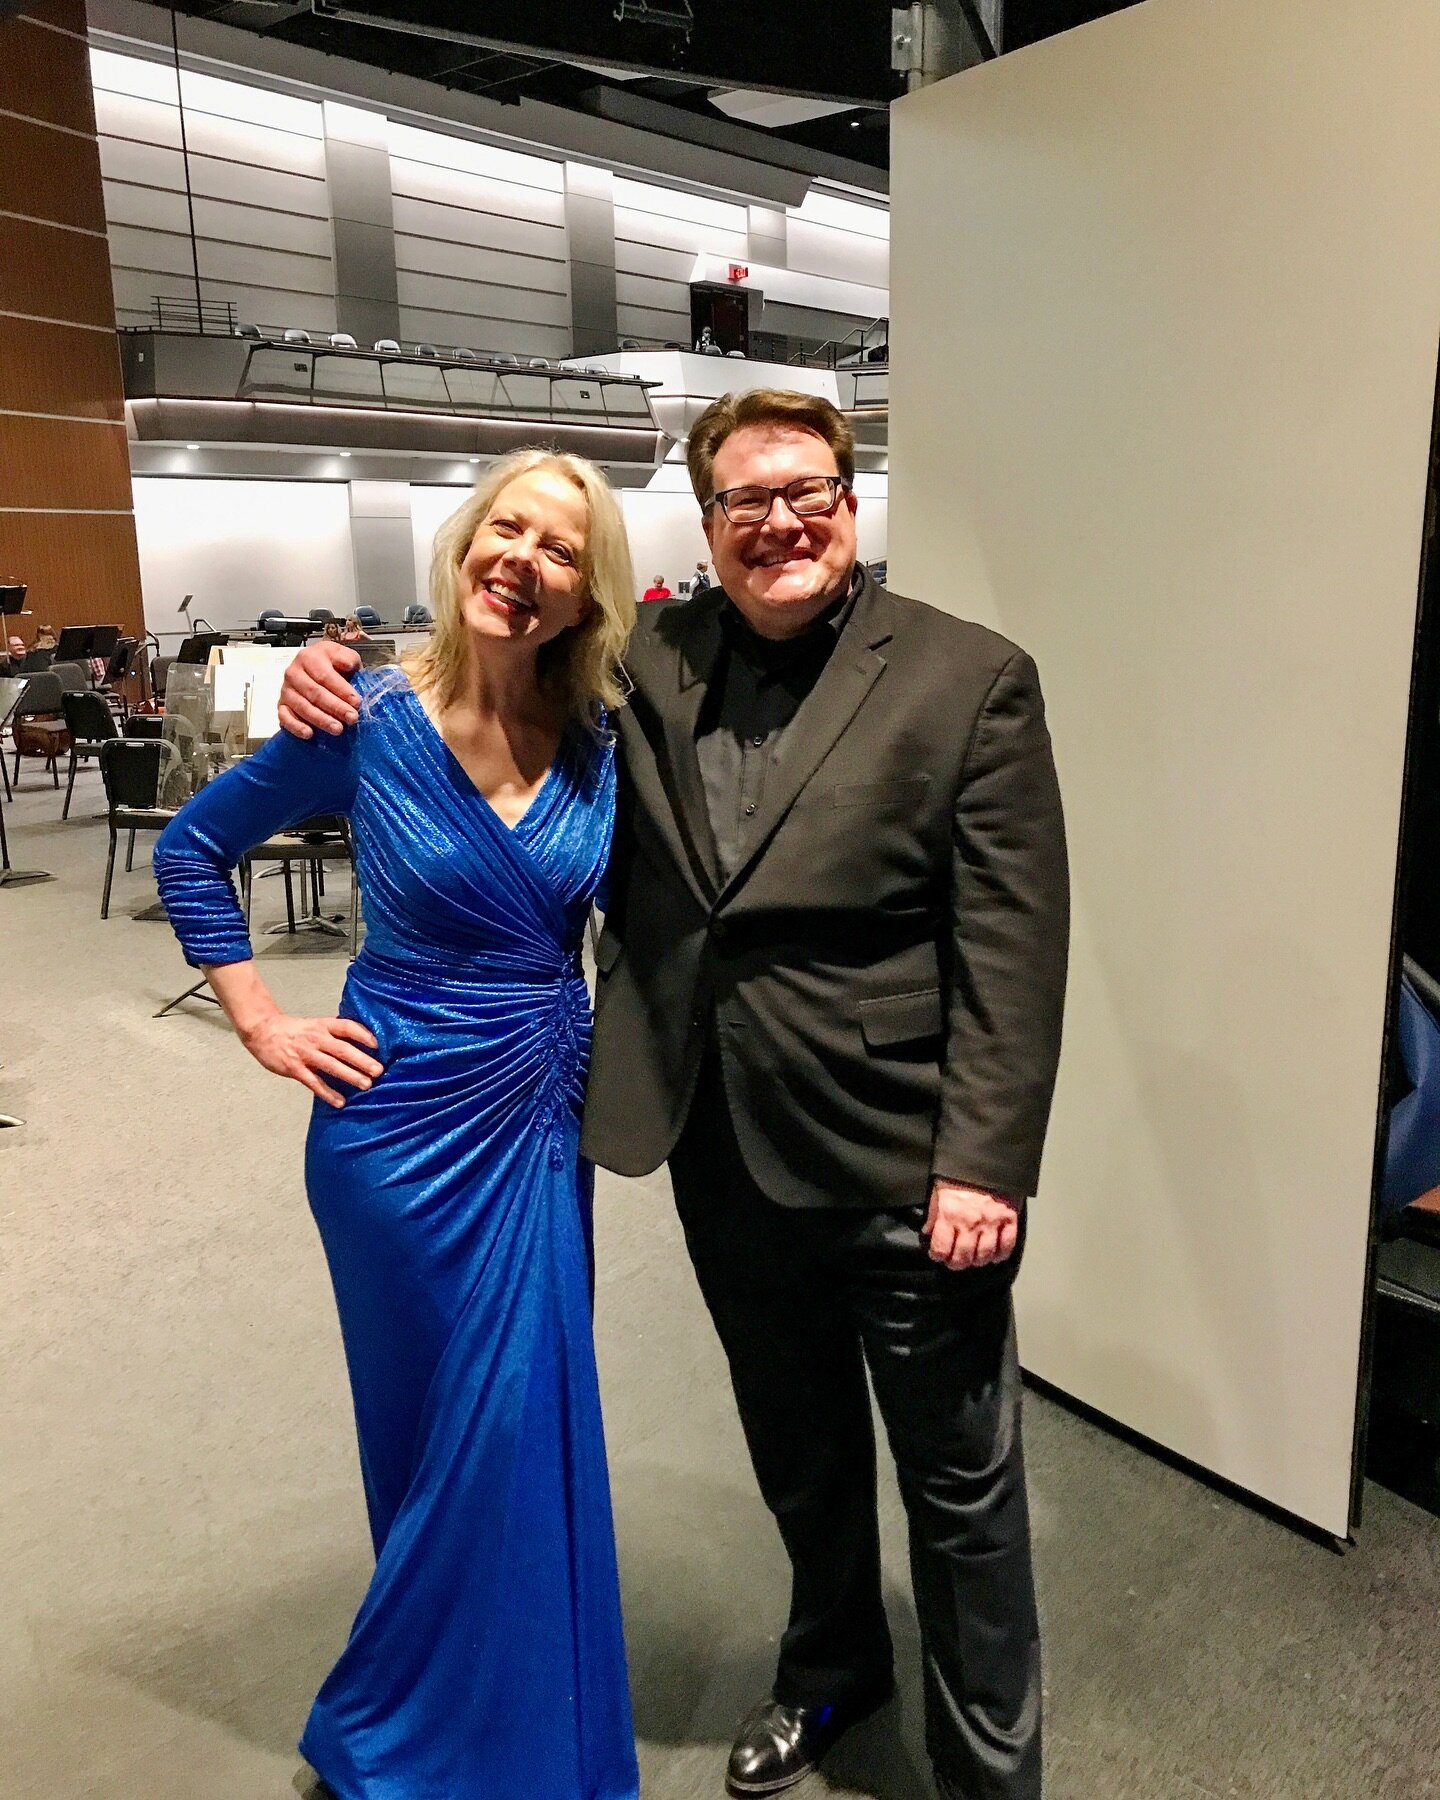 Thank you @jcsymphony for another beautiful concert. Collaborating with Rob Seebacher was again such an artistic inspiration, and the orchestra sounds amazing 👏🙏 
The Schumann piano concerto is a piece truly close to my heart as my mom and Schumann